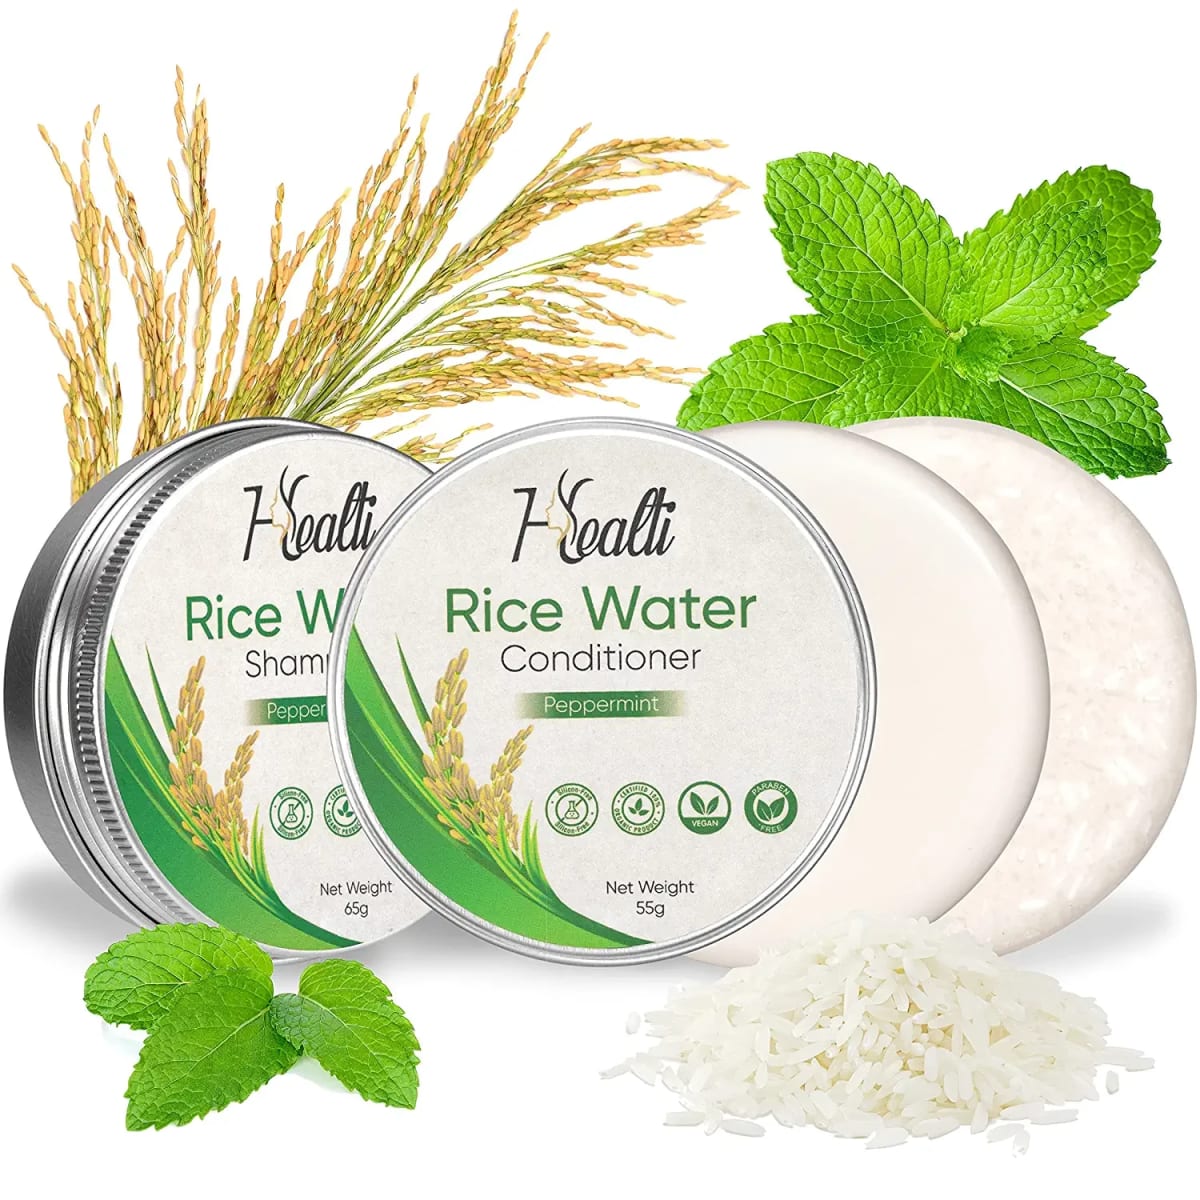 Rice Water Shampoo and Conditioner - Rice Water for Hair Growth Moisturizing